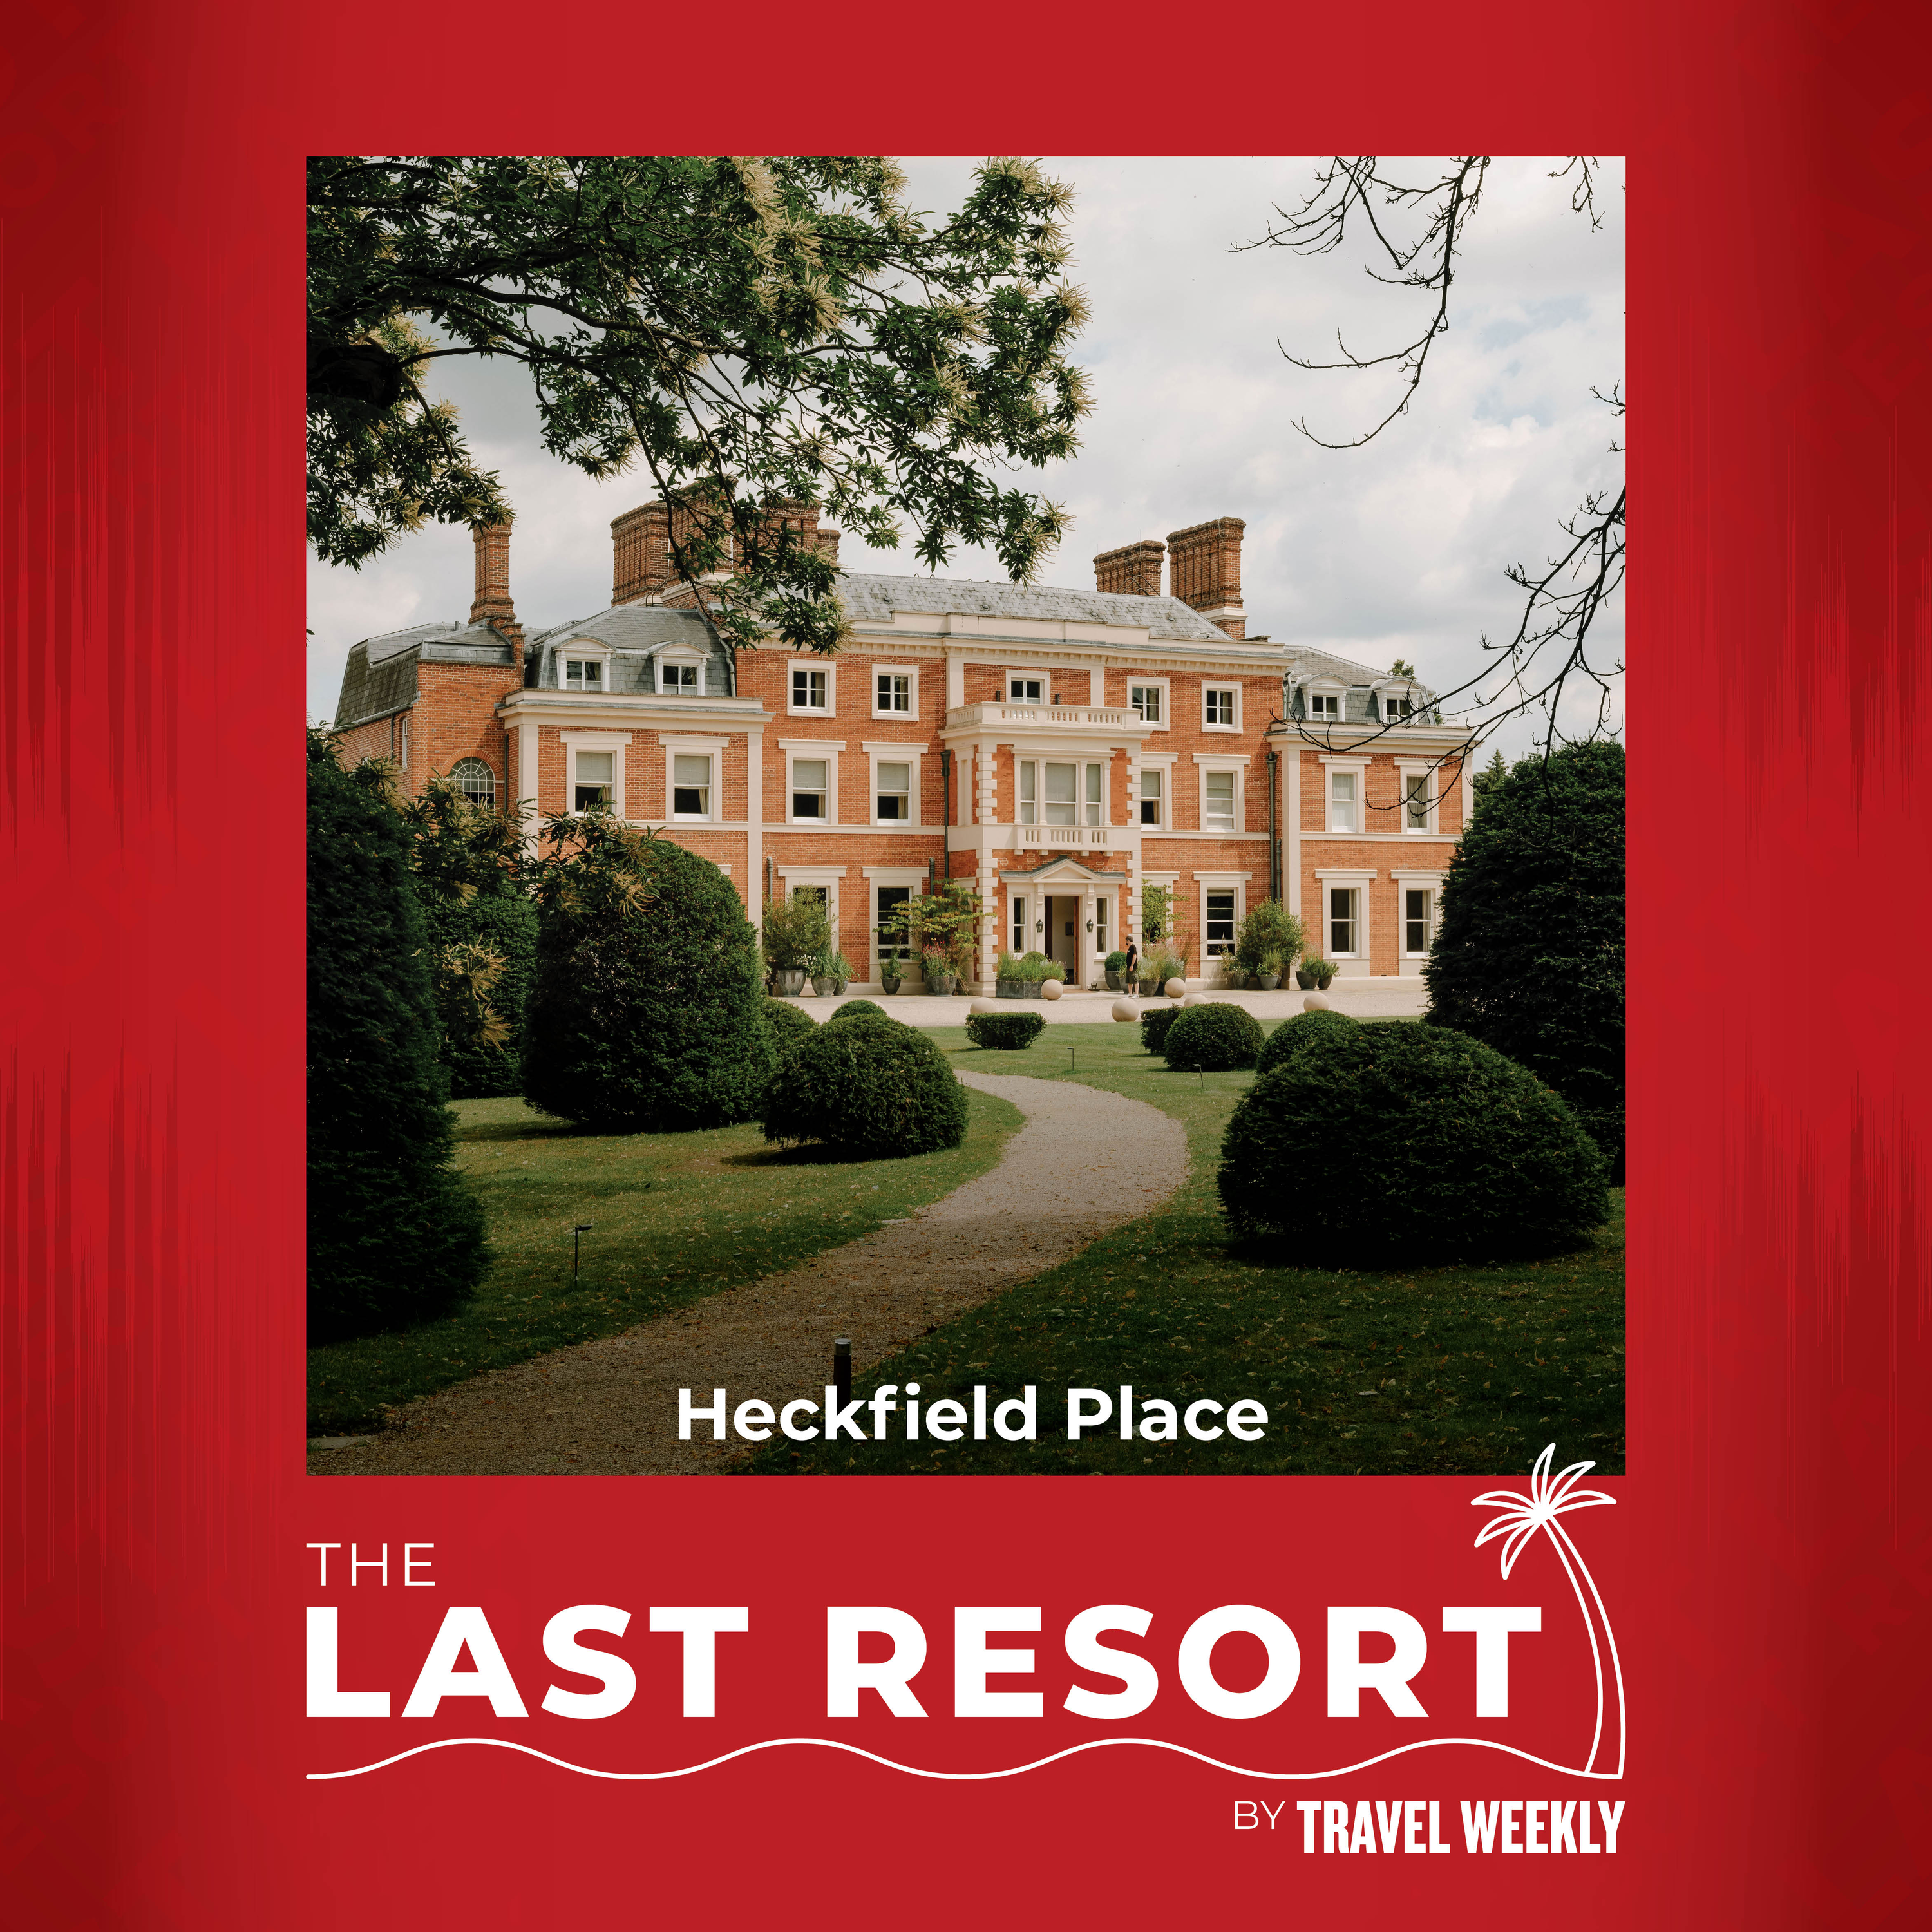 The Last Resort: The Newt & Heckfield Place